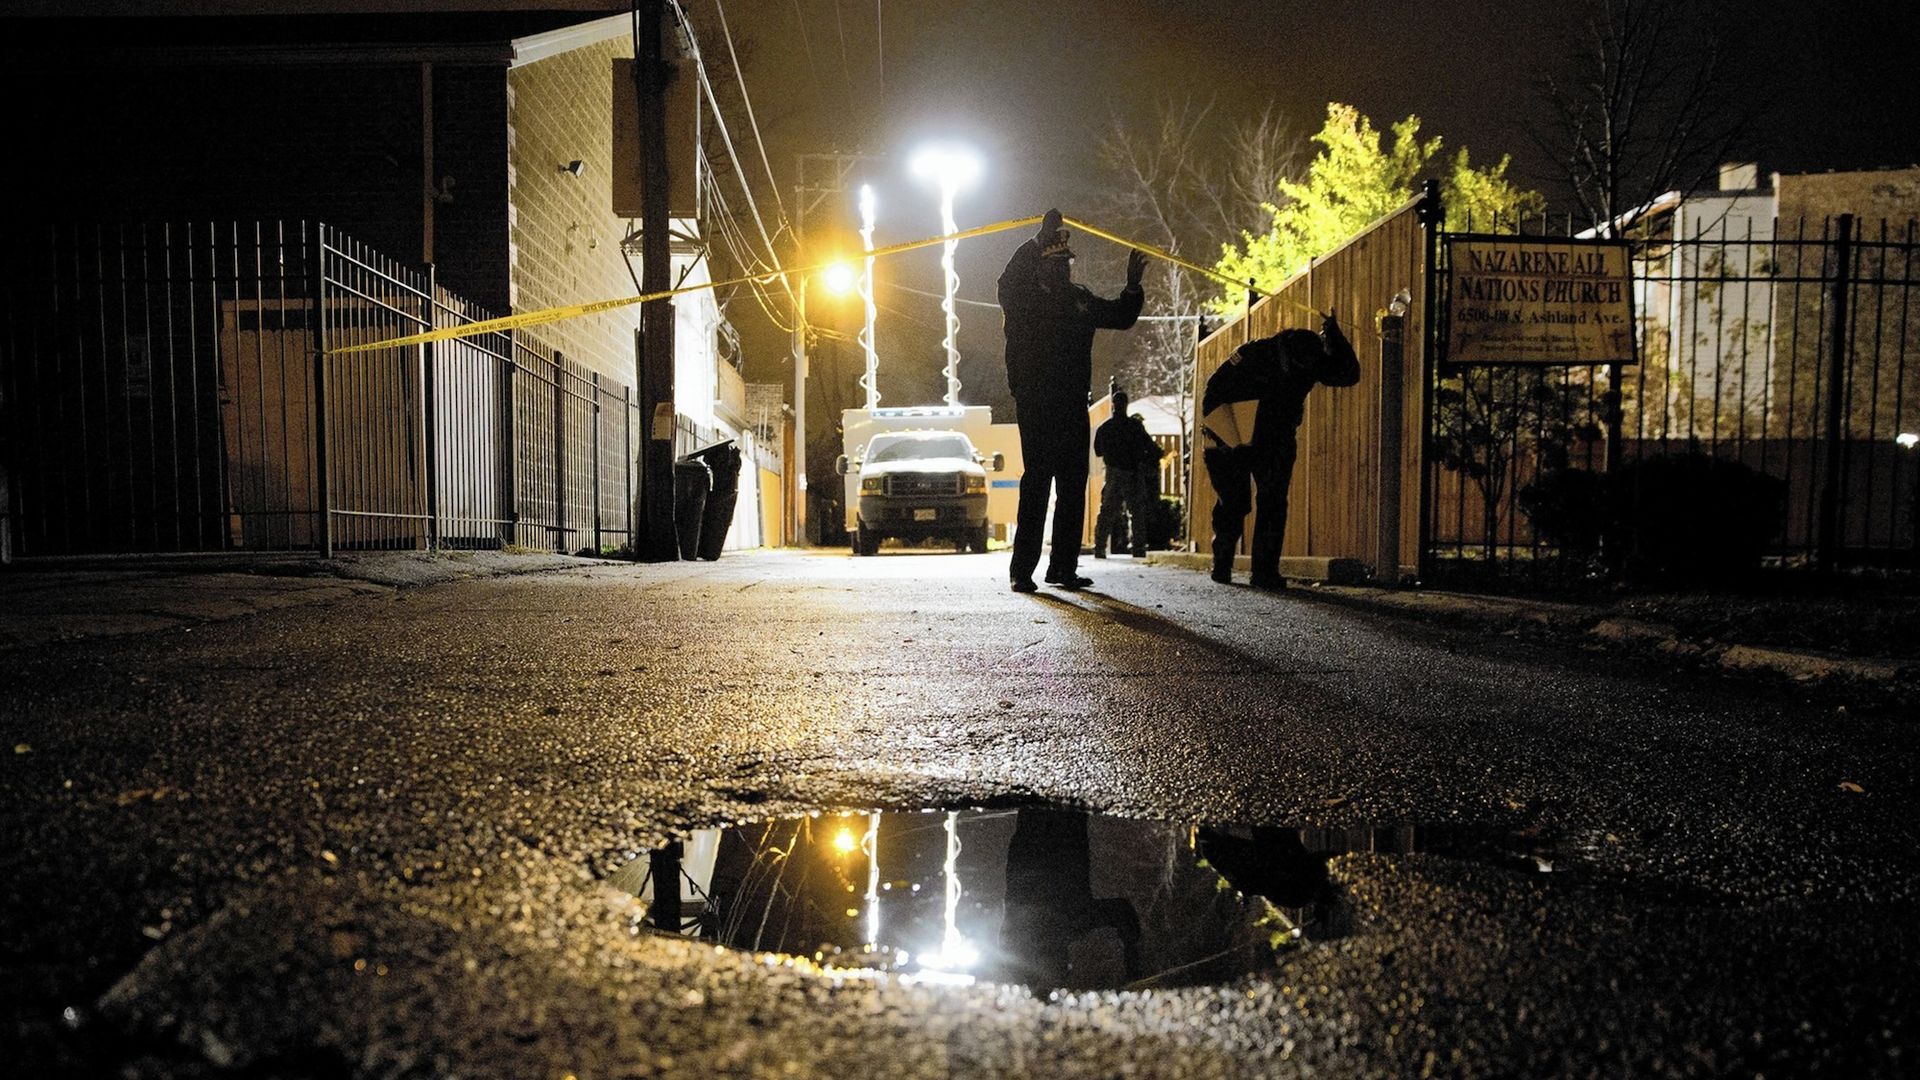 A puddle in a dark alley with a person lifting yellow crime tape.